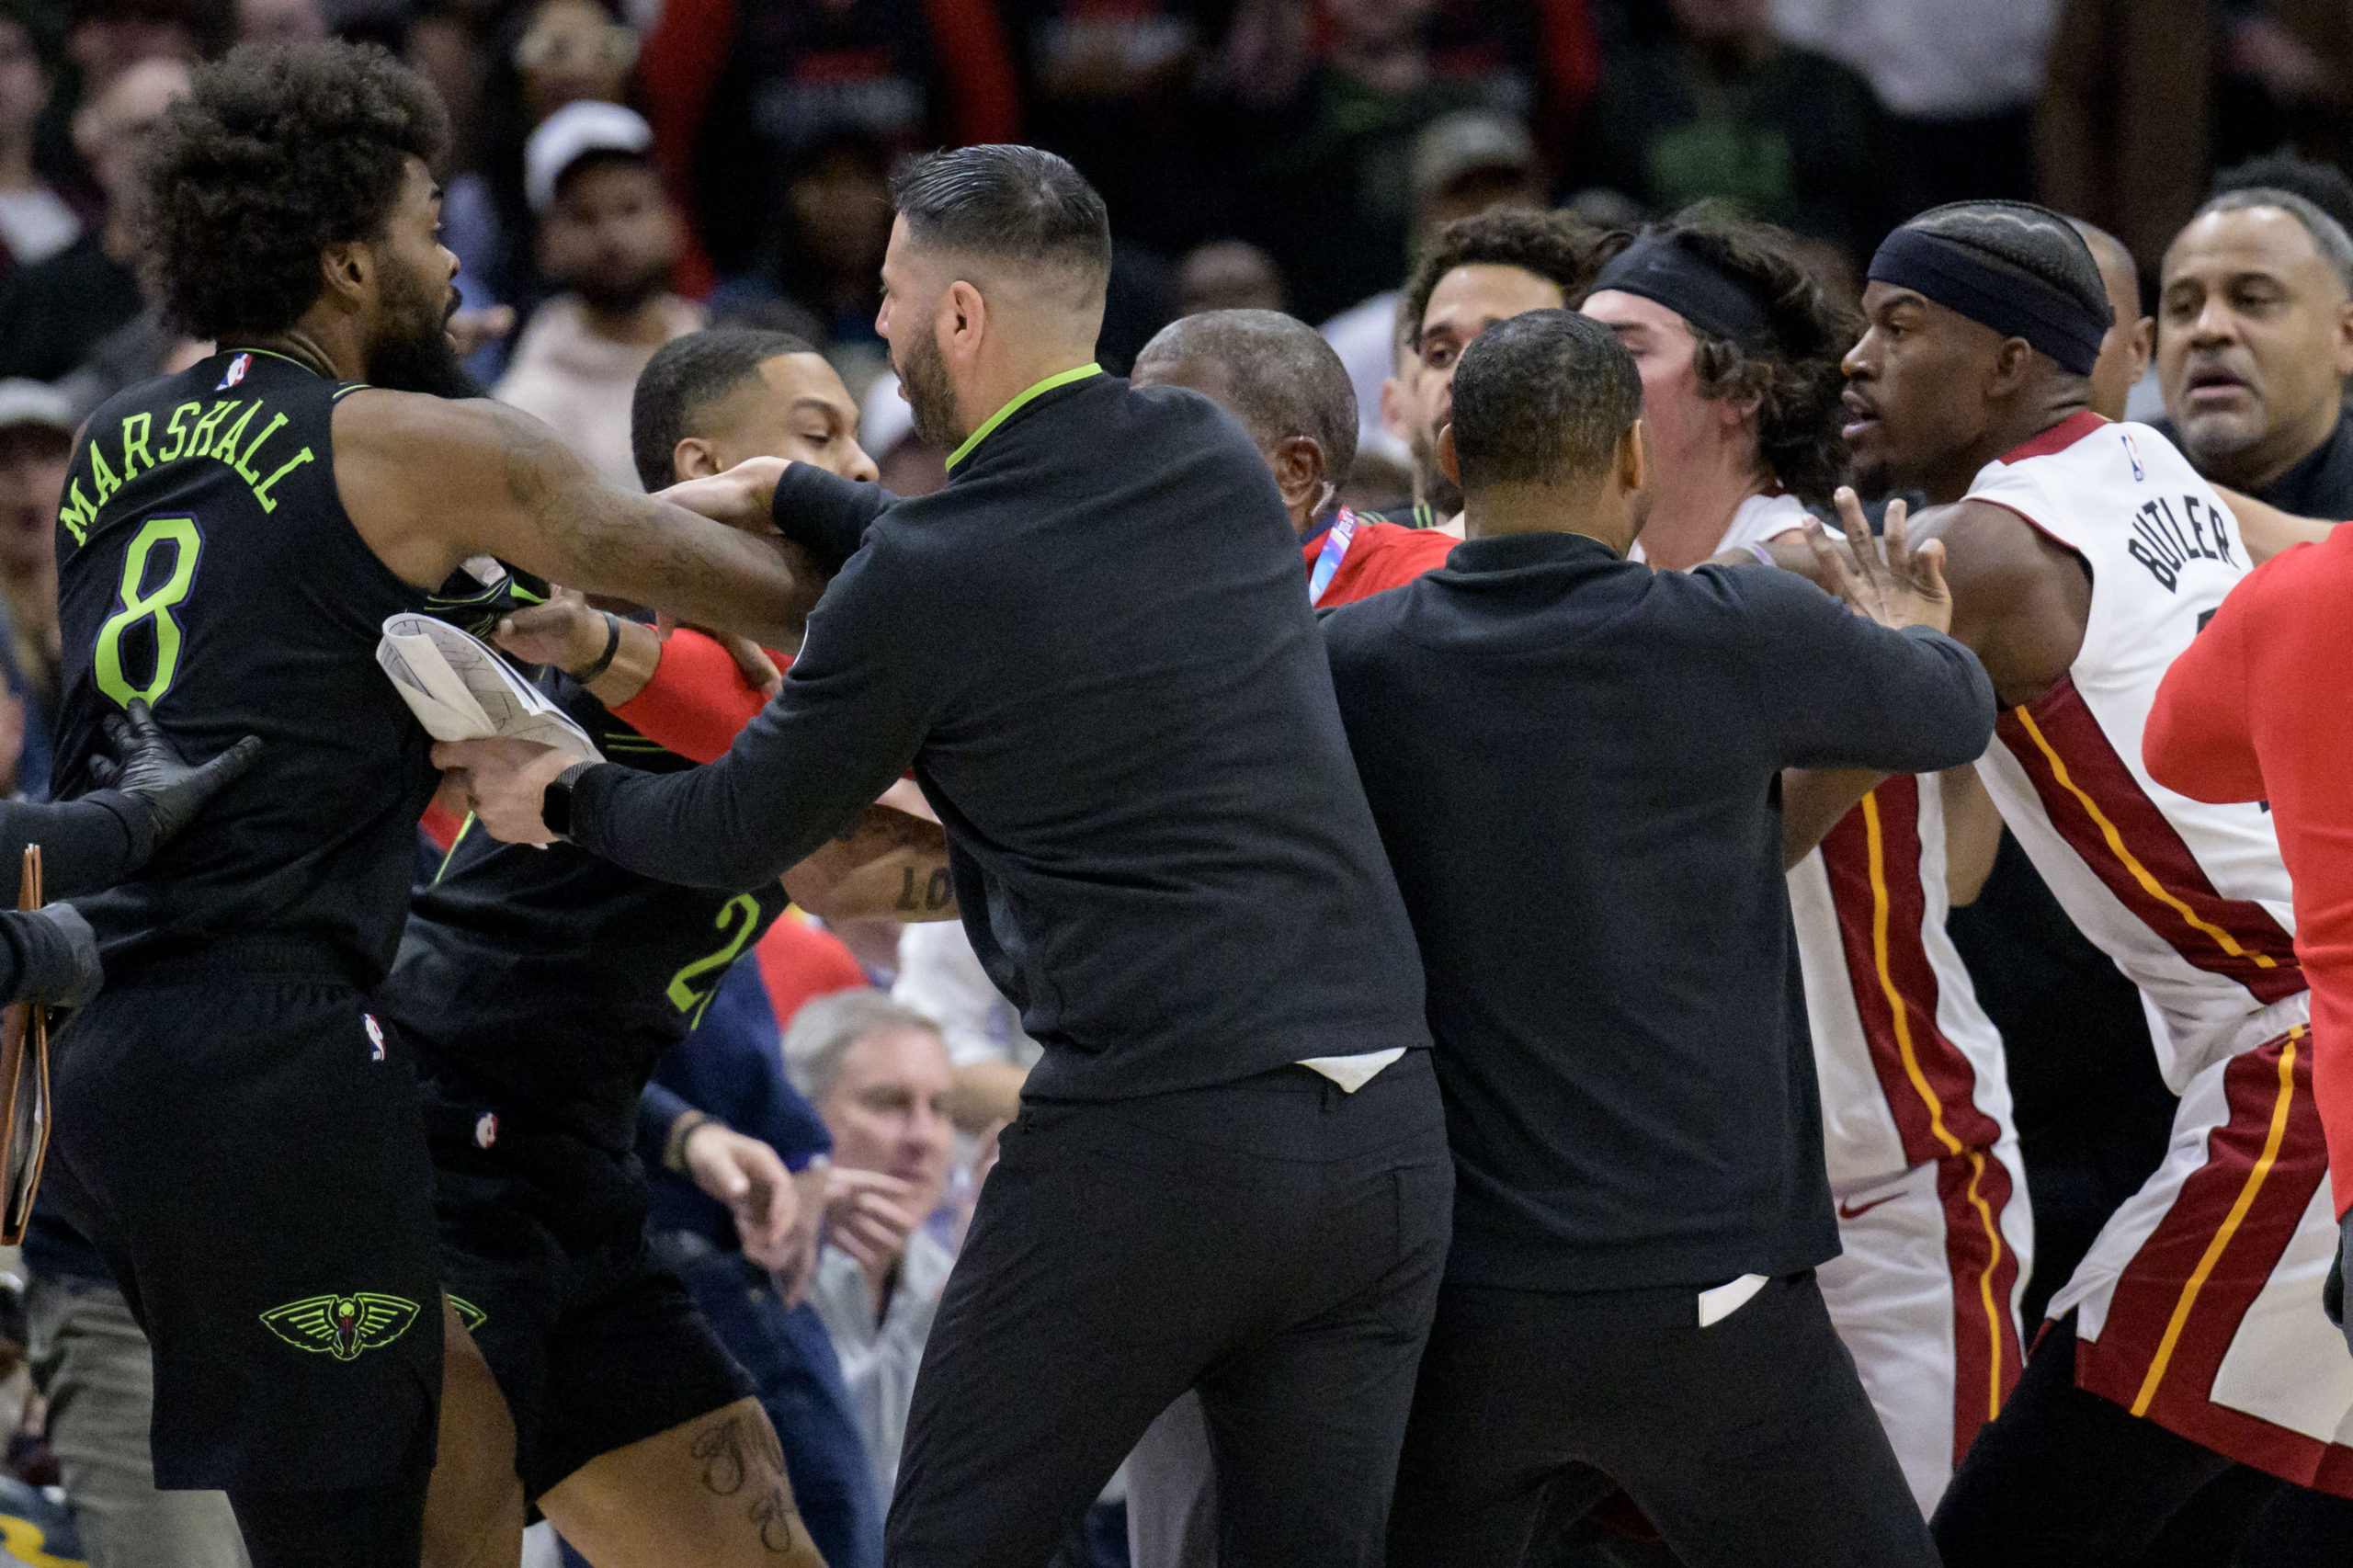 Miami's Jimmy Butler, far right, and New Orleans' Naji Marshall, far left, get involved in a scuffle during the fourth quarter of an NBA game in New Orleans on Friday night.